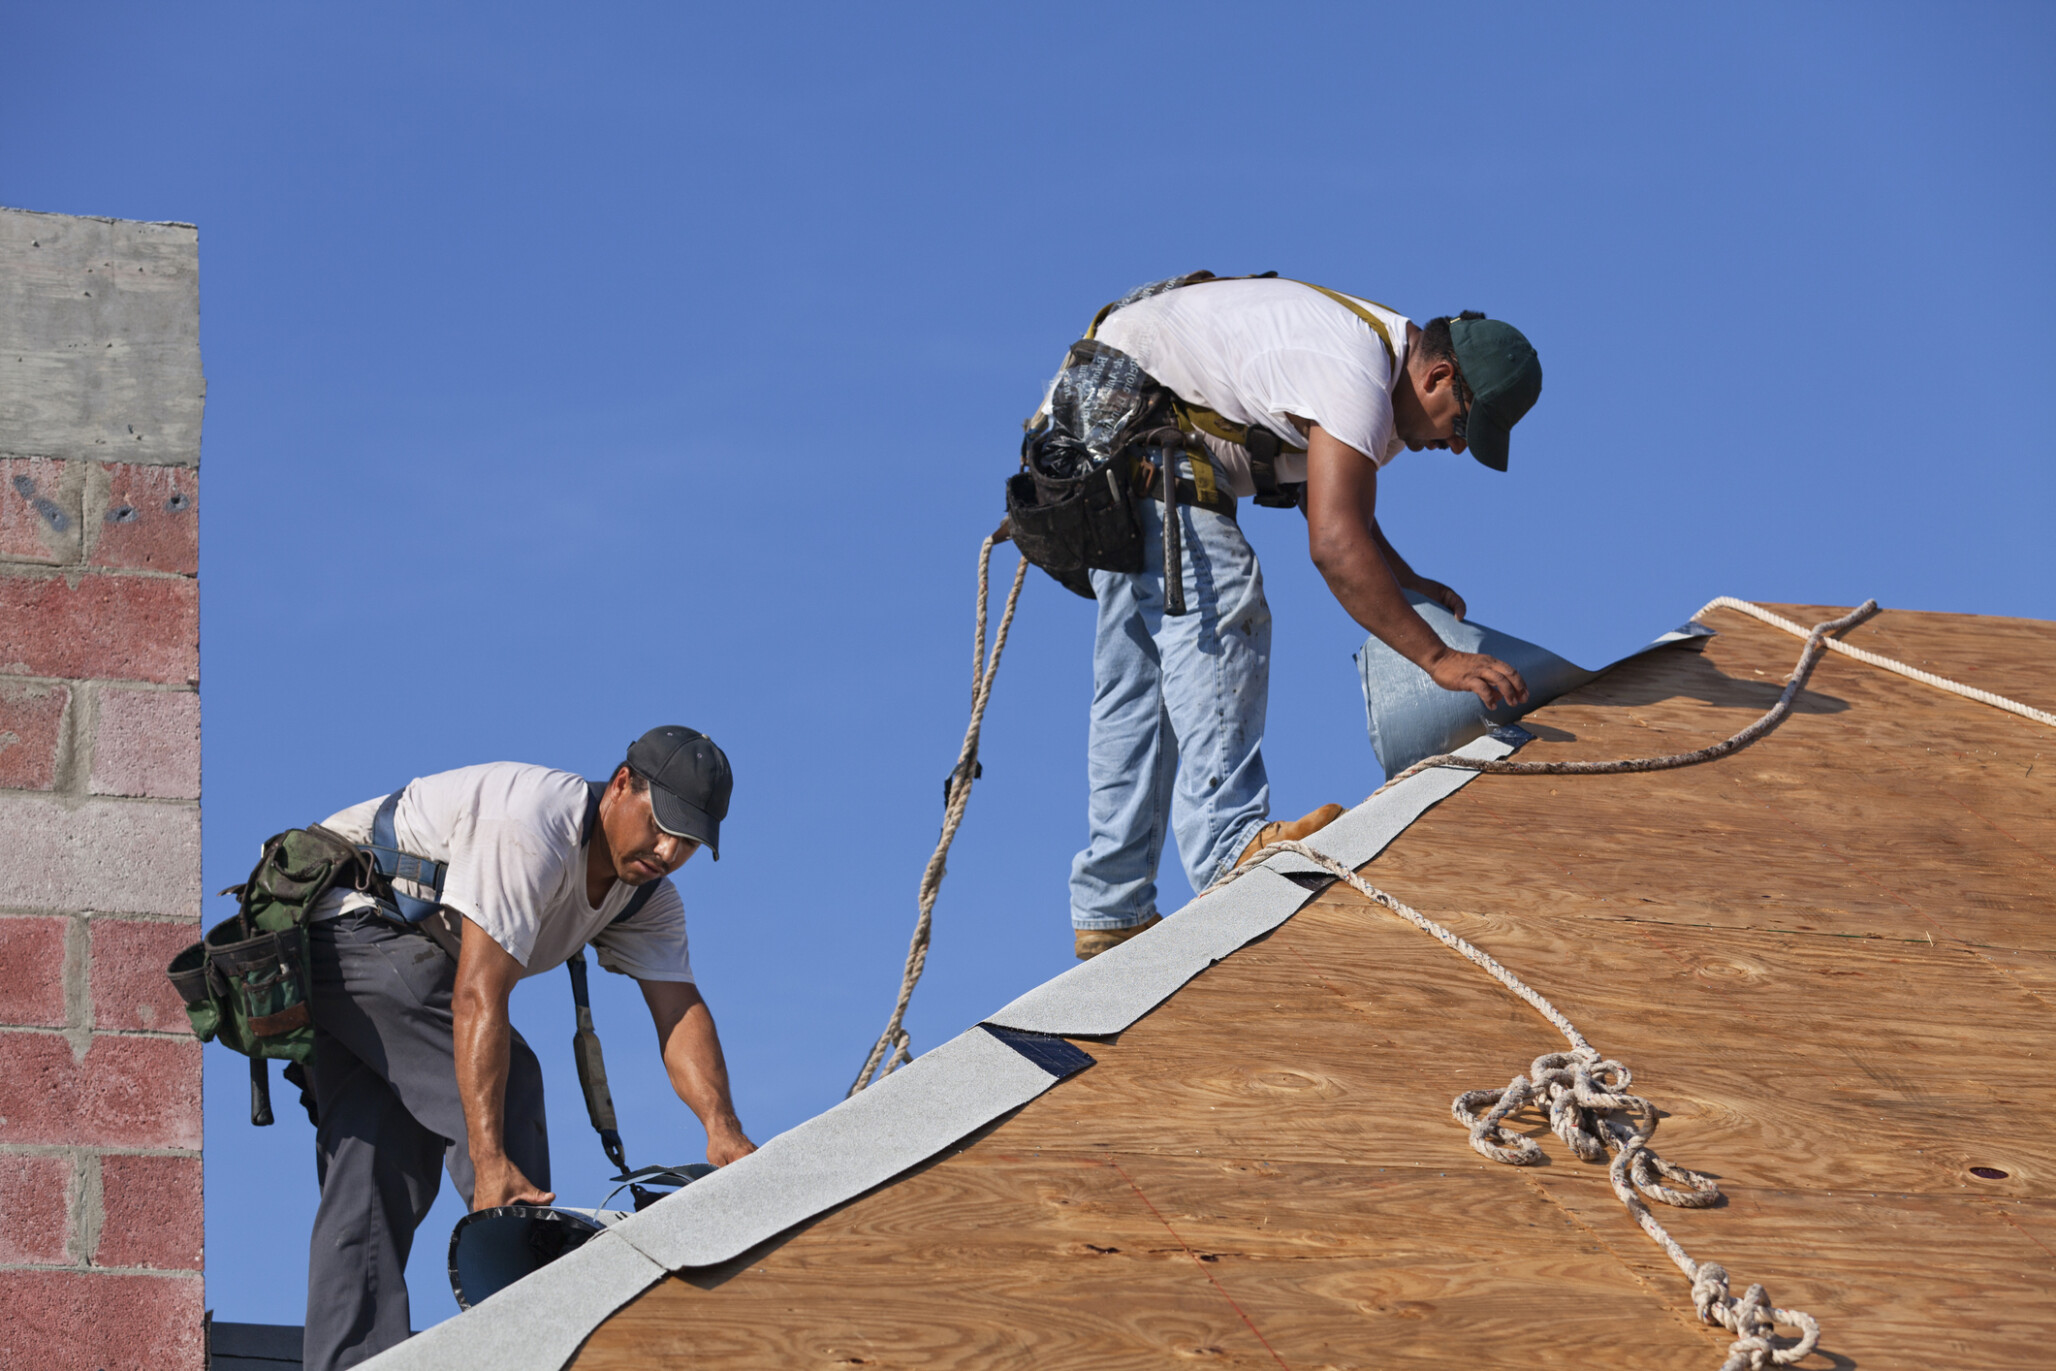 The Top 10 Roofing Safety Tips Every Contractor Should Know